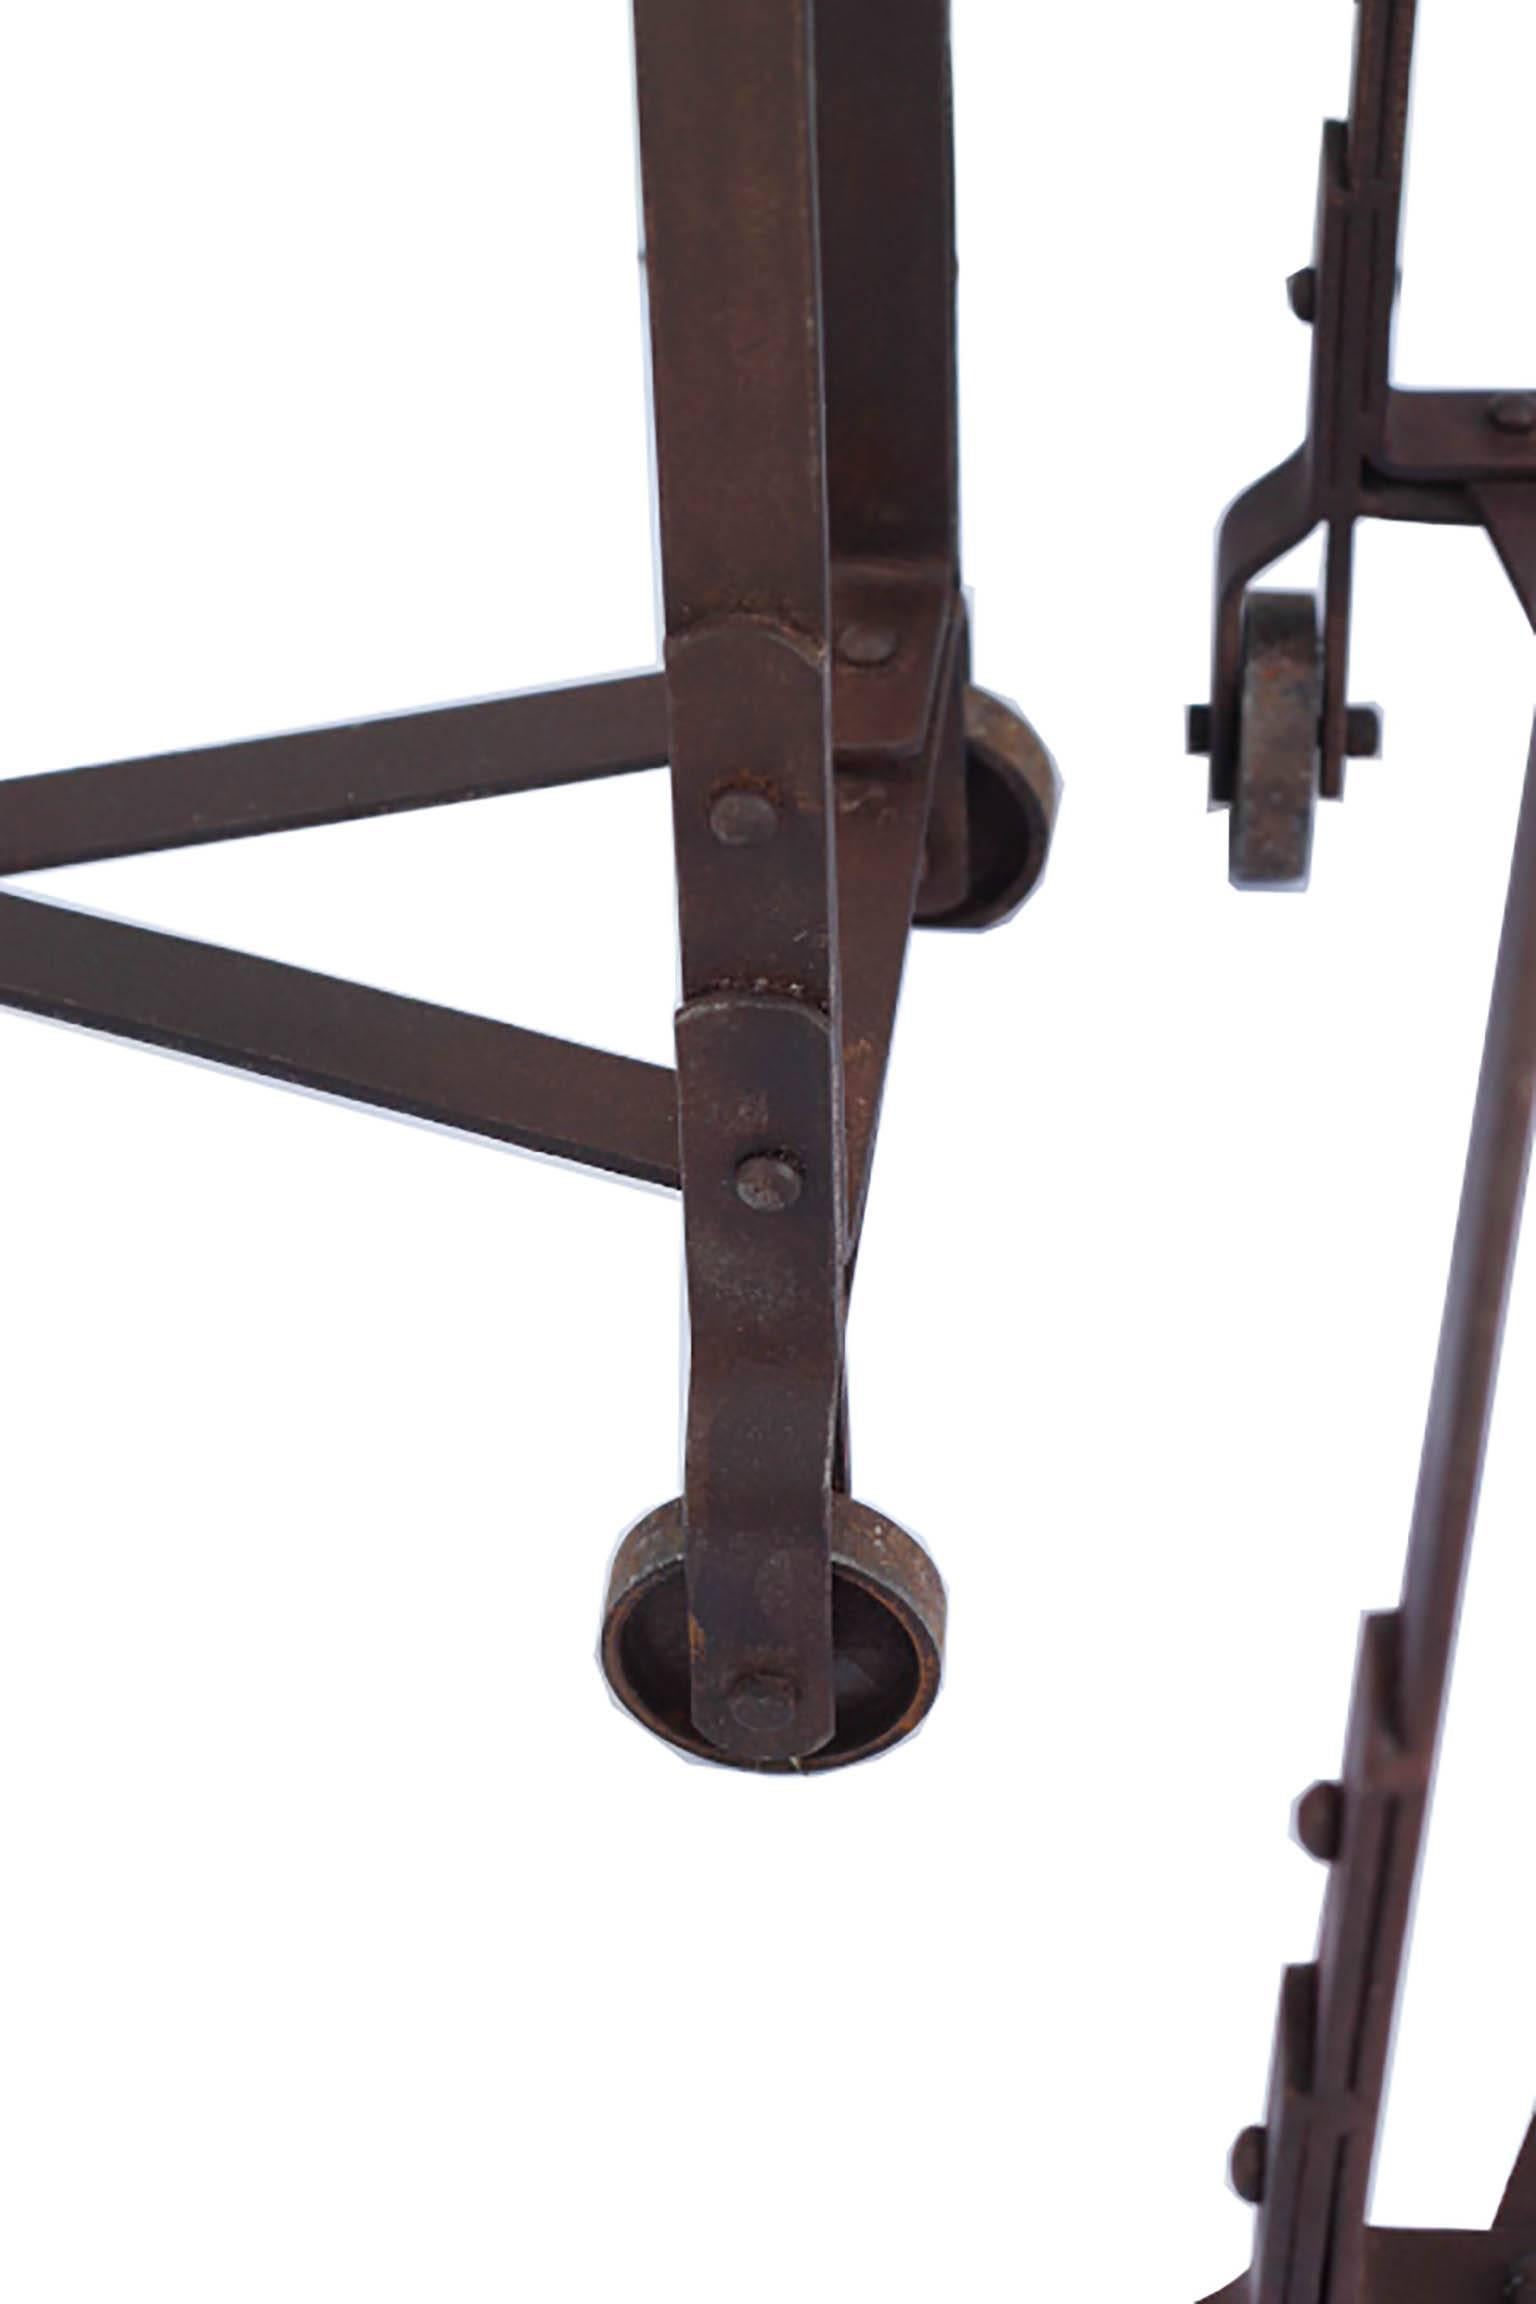 Pair of steel table bases with four steel wheels on each base and X-frame supports on the bottom. Suitable for the base for a console, dining table or desk.